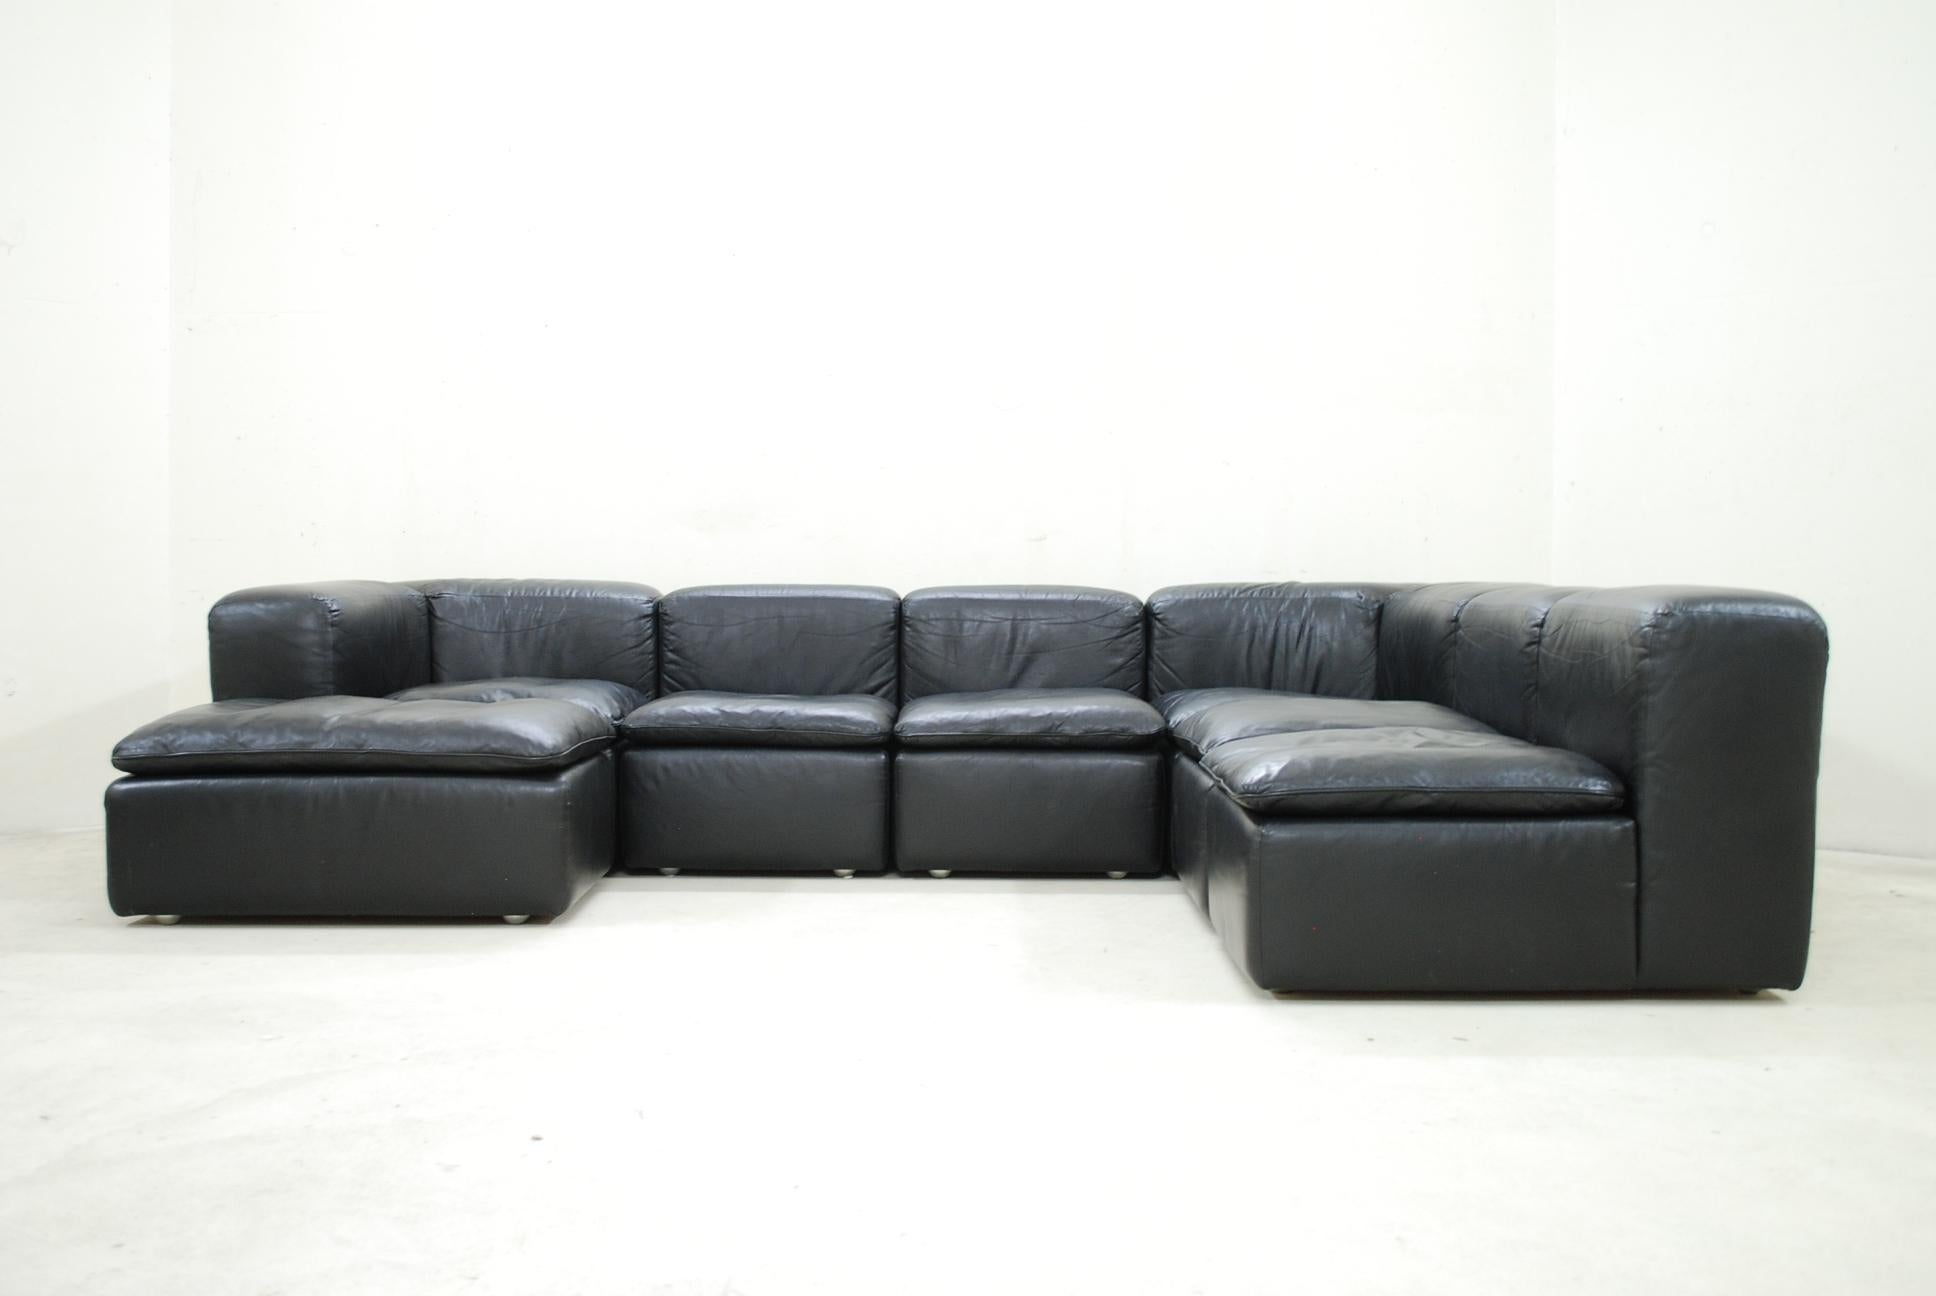 This vintage module sofa was designed by German architect Ernst Martin Dettinger for WK Möbel / WK Wohnen.
The name is model WK 550 and have references to cube design.
It consists of 7 elements: 4 single elements 1 ottoman and 2 corner elements